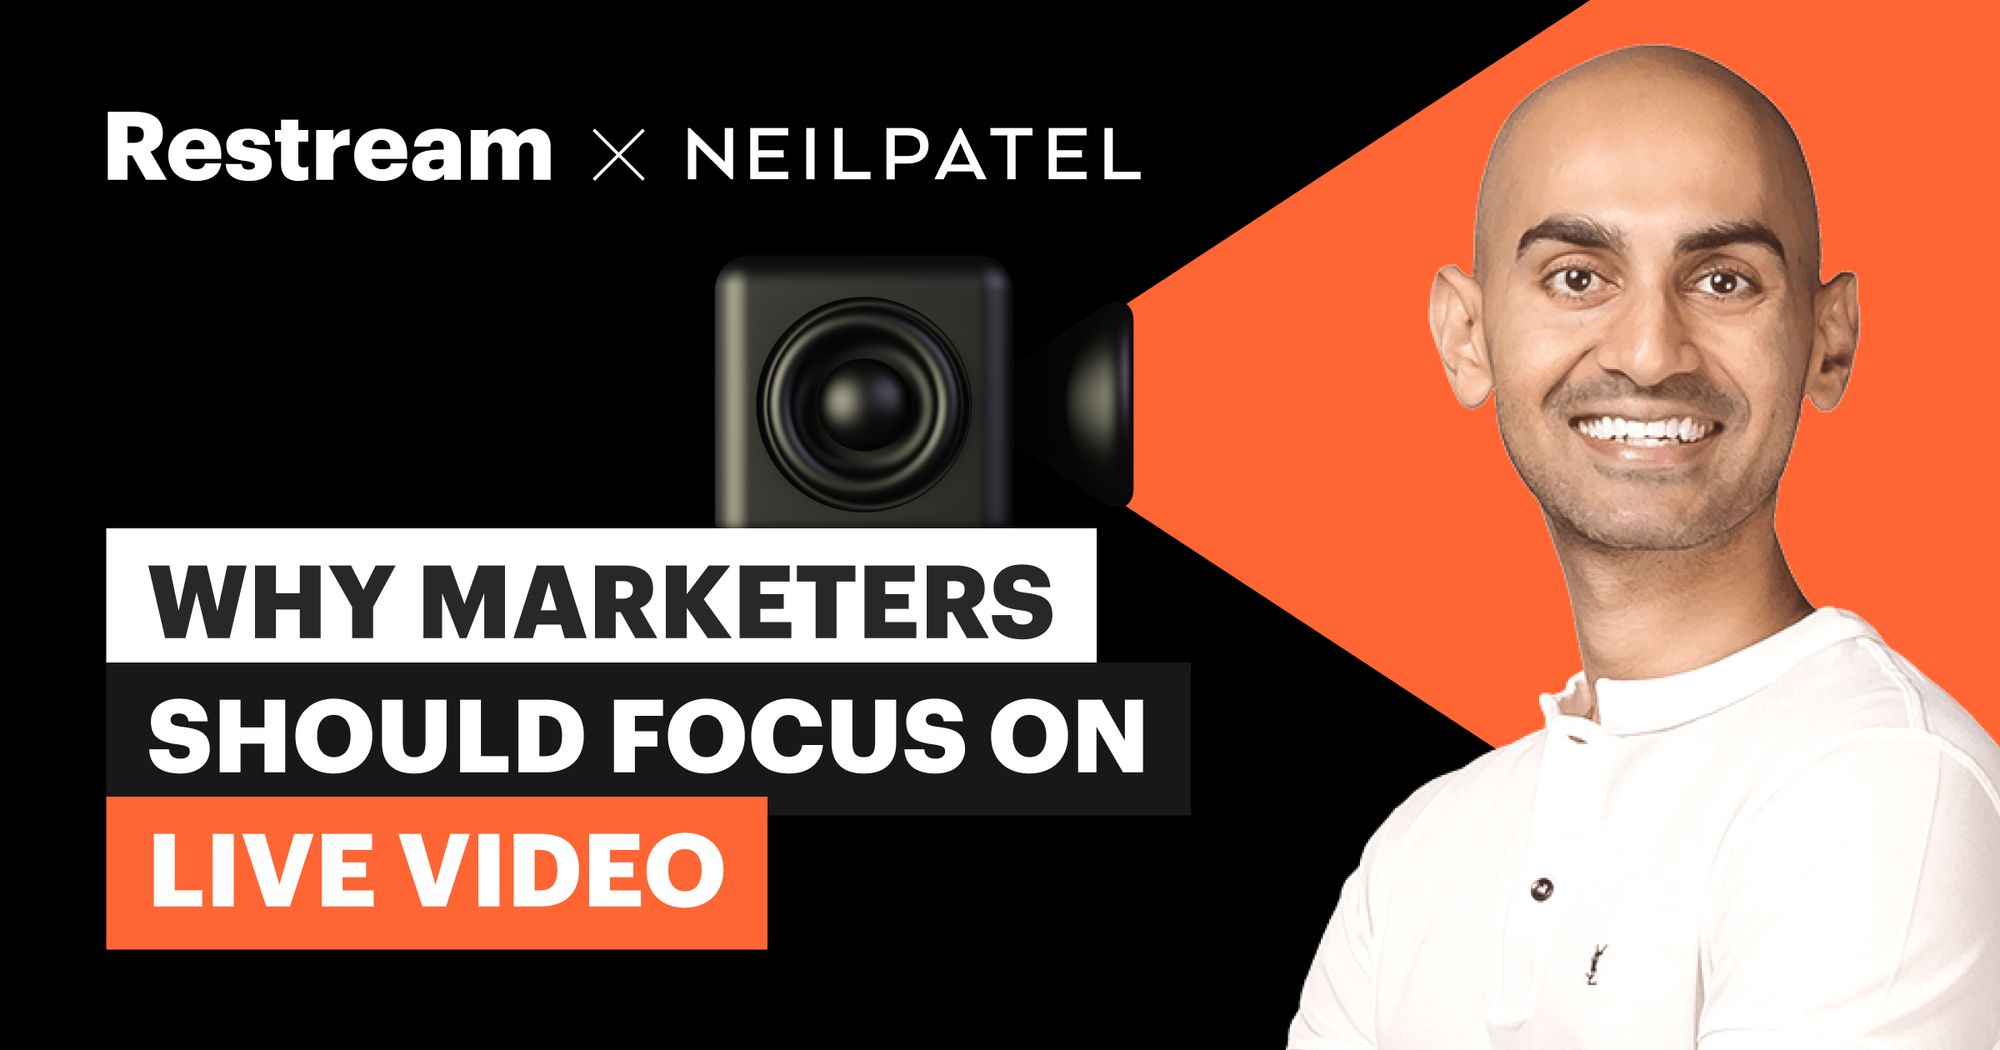 15 questions for Neil Patel about live streaming